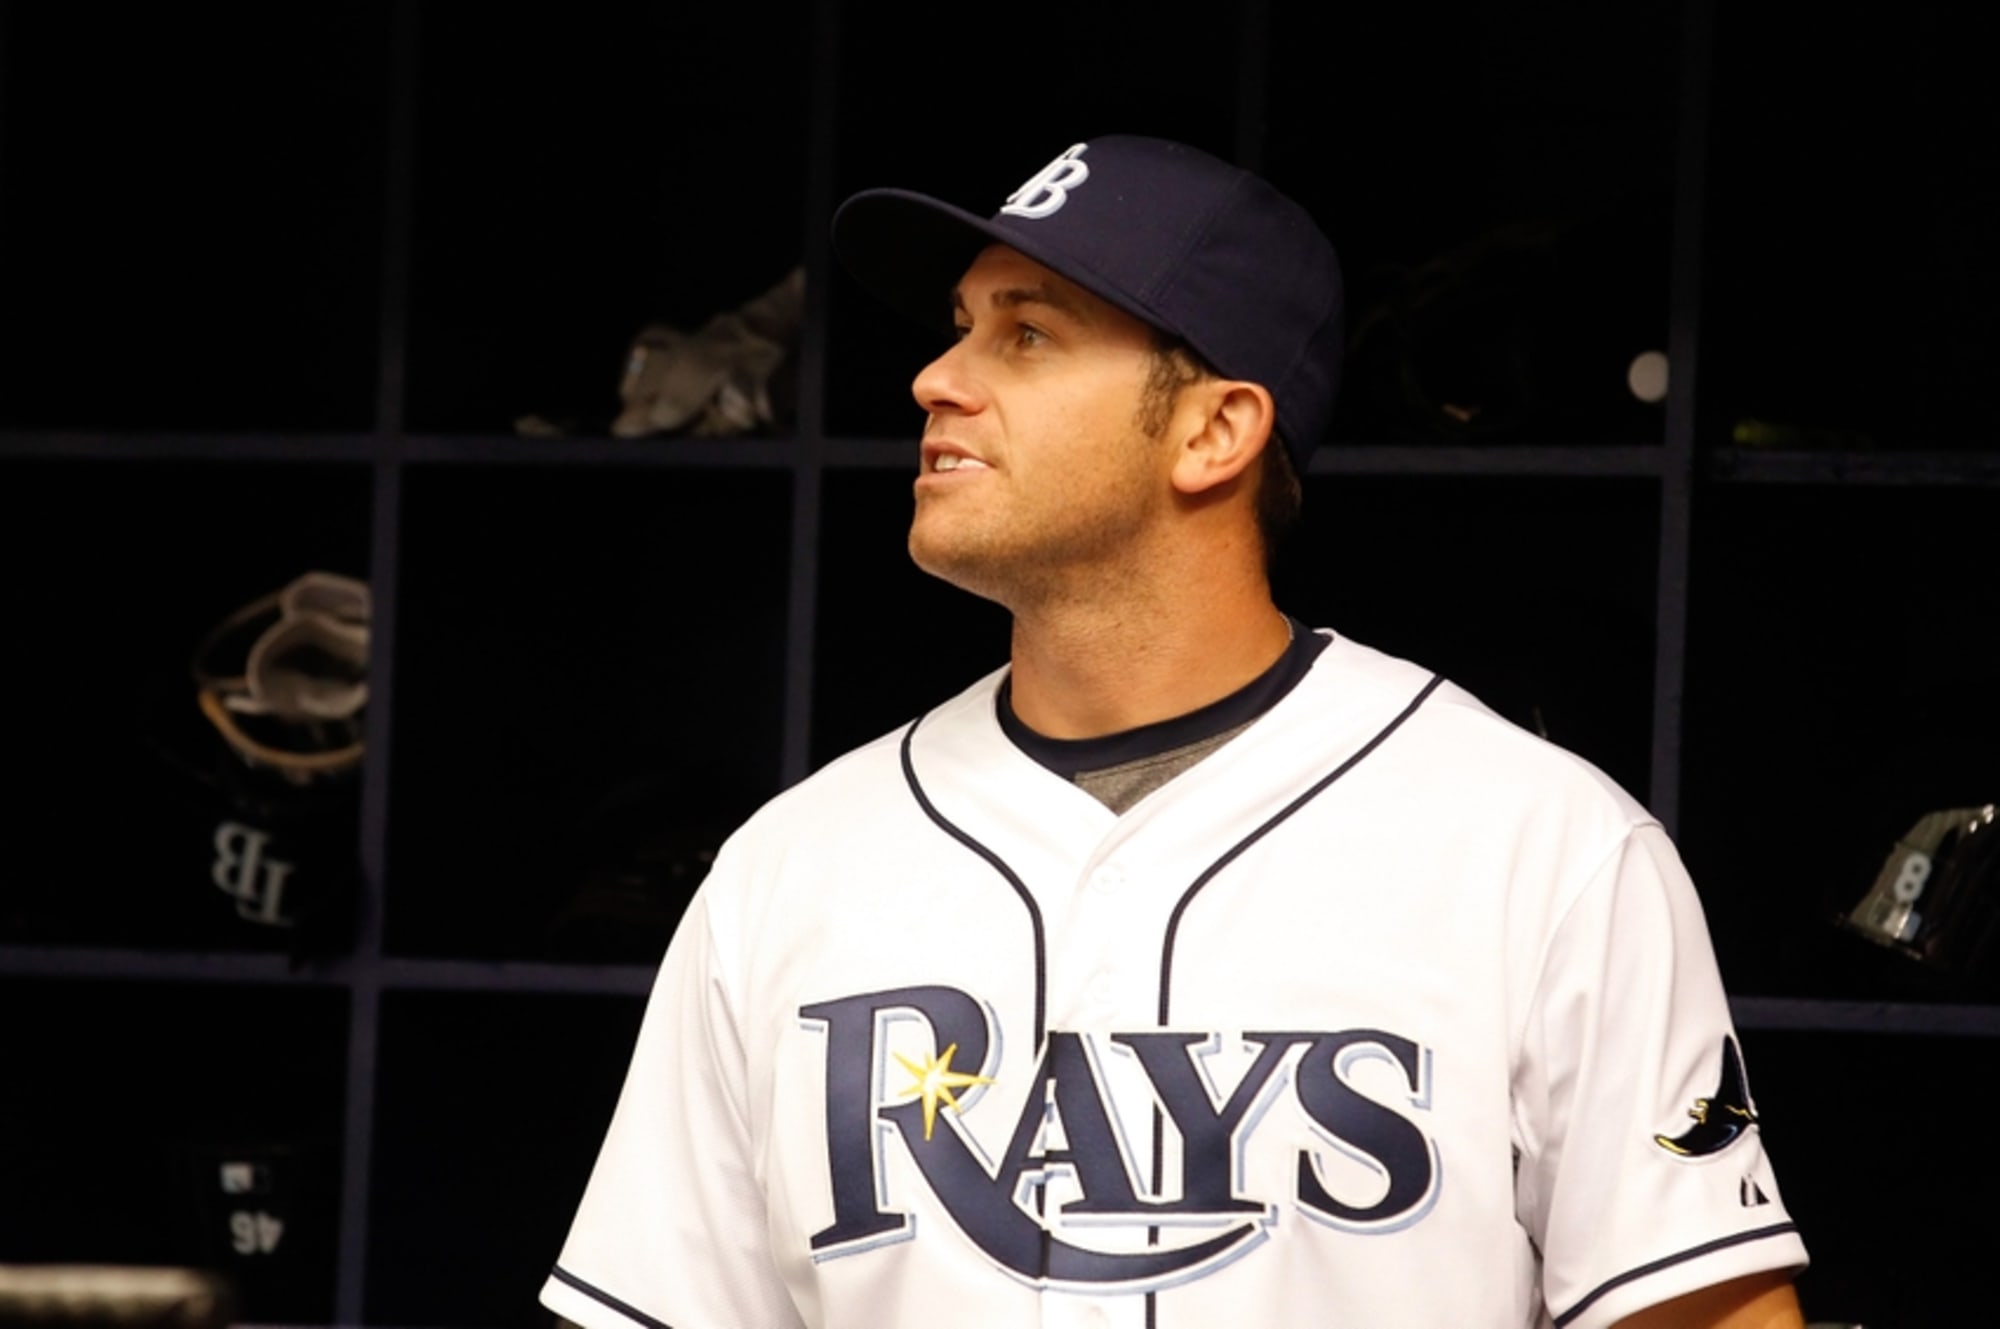 Tampa Bay Rays: Evan Longoria Sentenced To Life With No Chance Of Parole